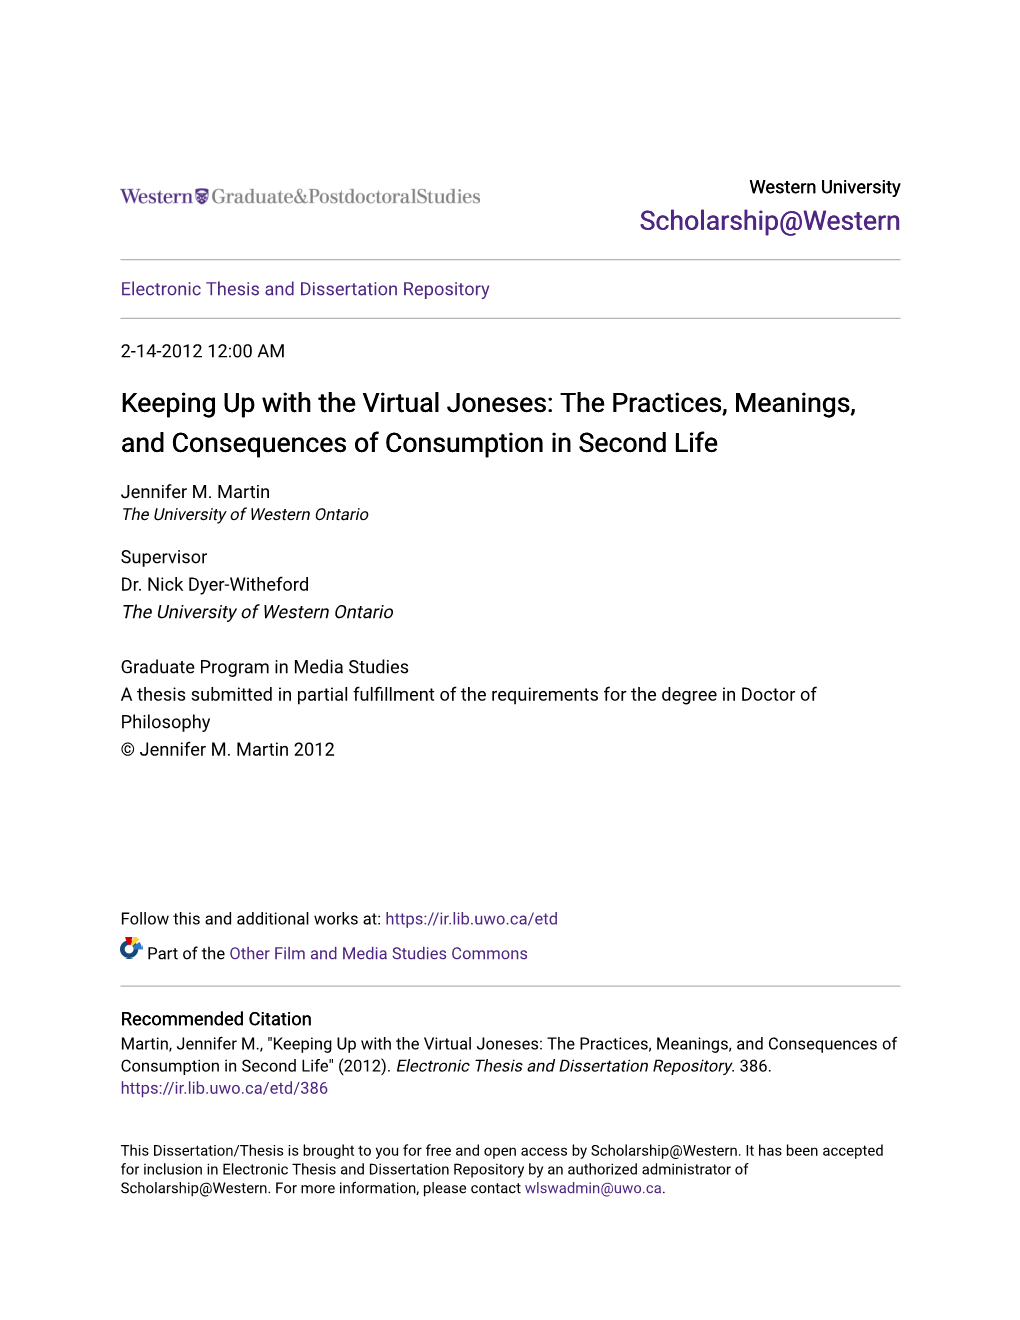 Keeping up with the Virtual Joneses: the Practices, Meanings, and Consequences of Consumption in Second Life